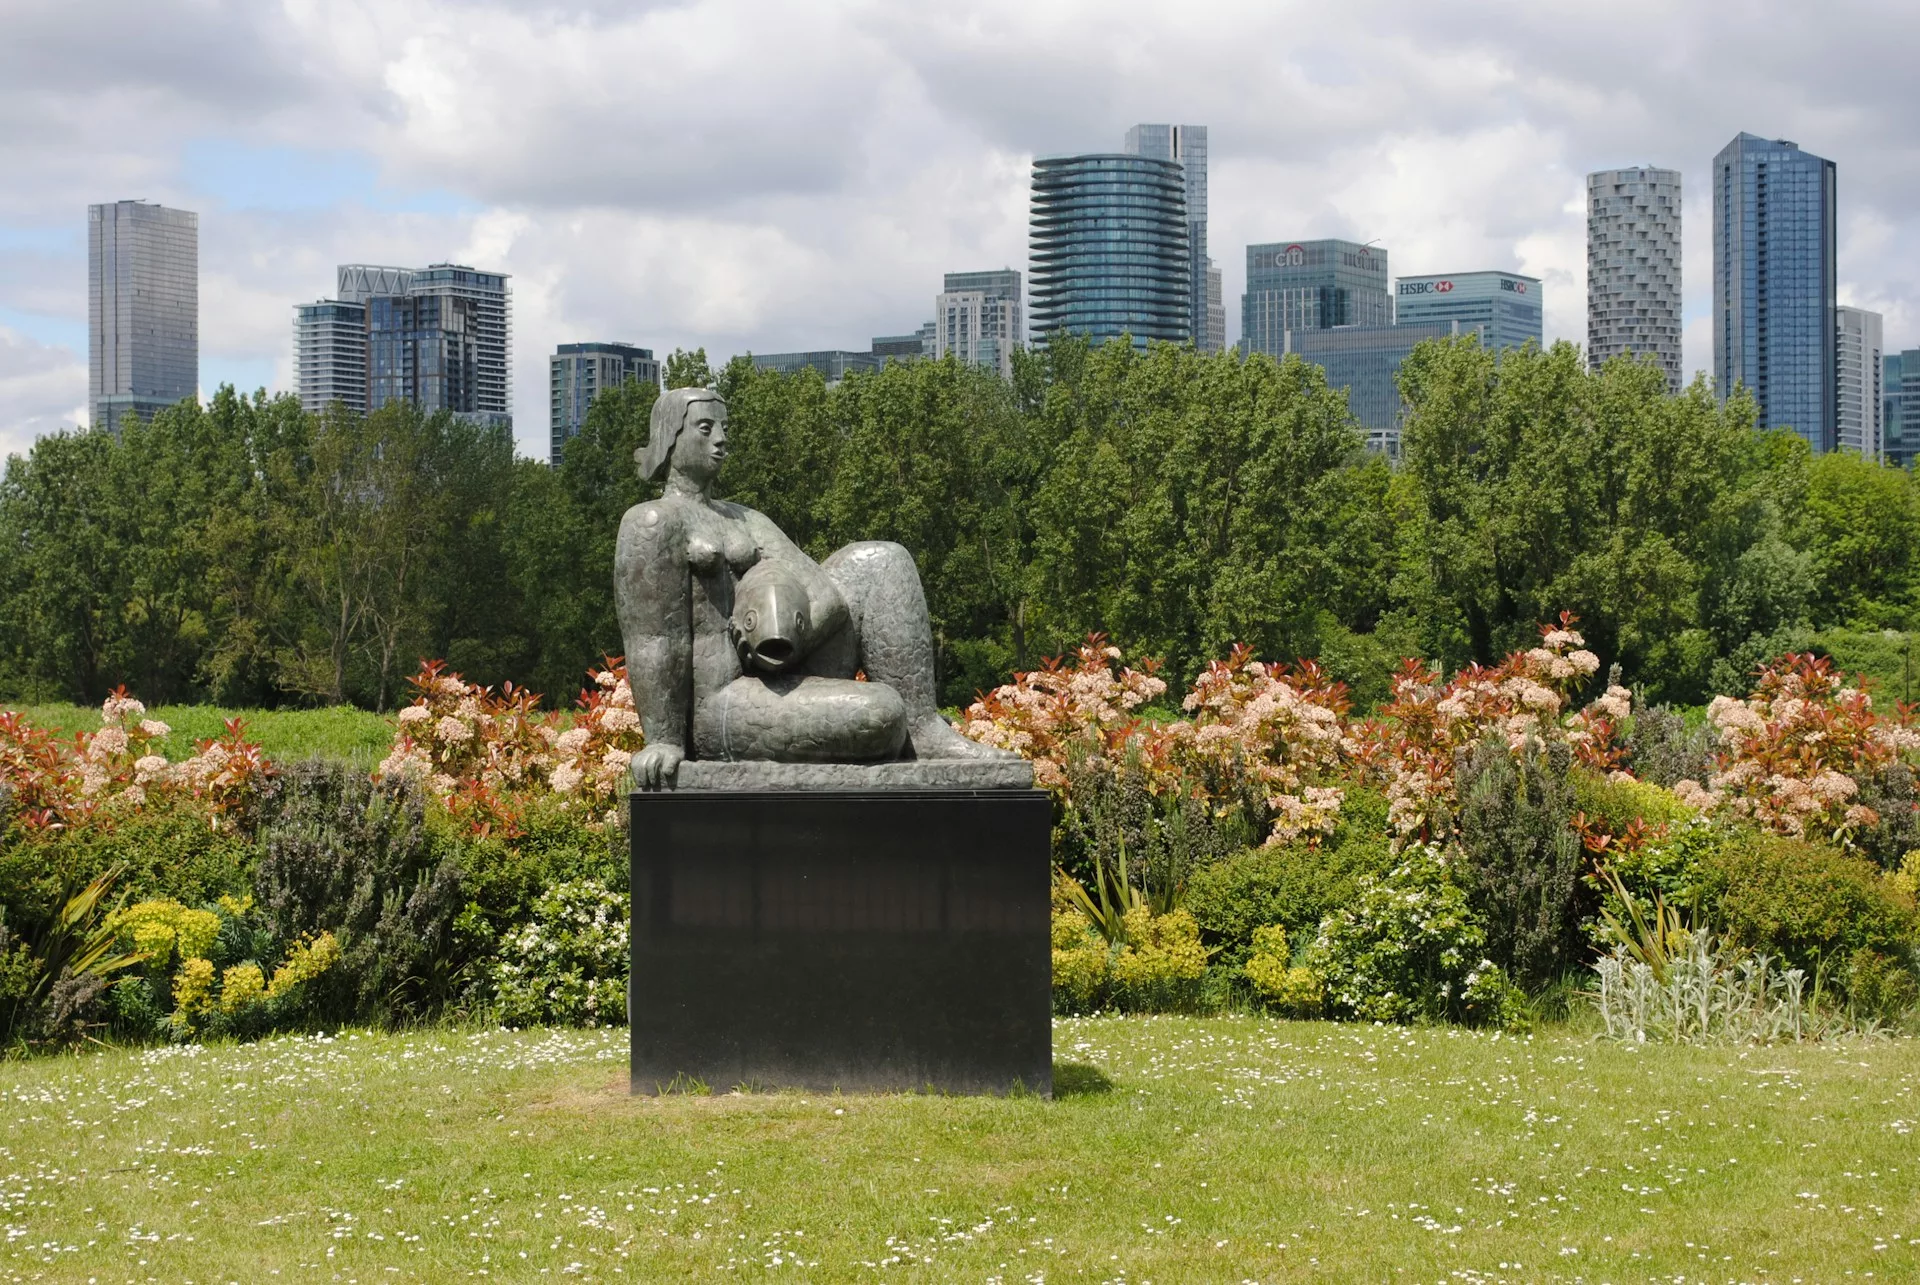 Sculpture of a woman in a park with skyscrapers